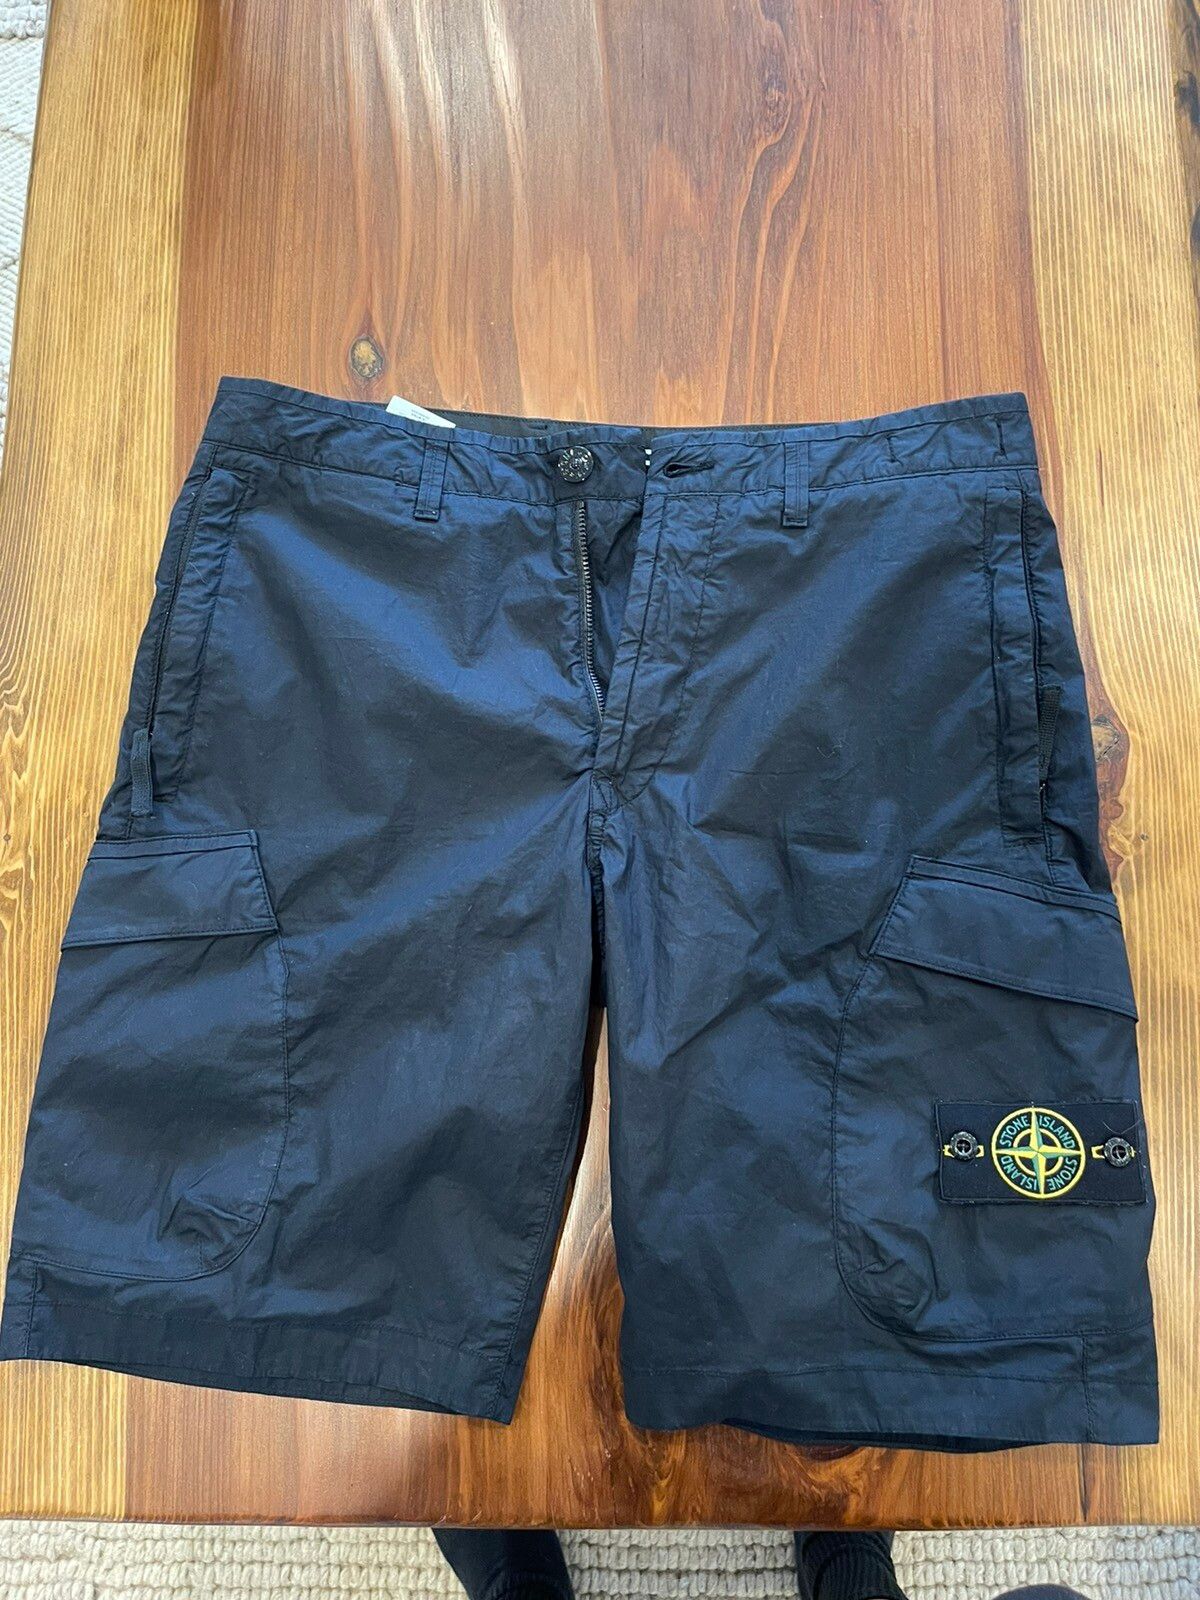 Pre-owned Stone Island Cargo Pants Navy Size M New